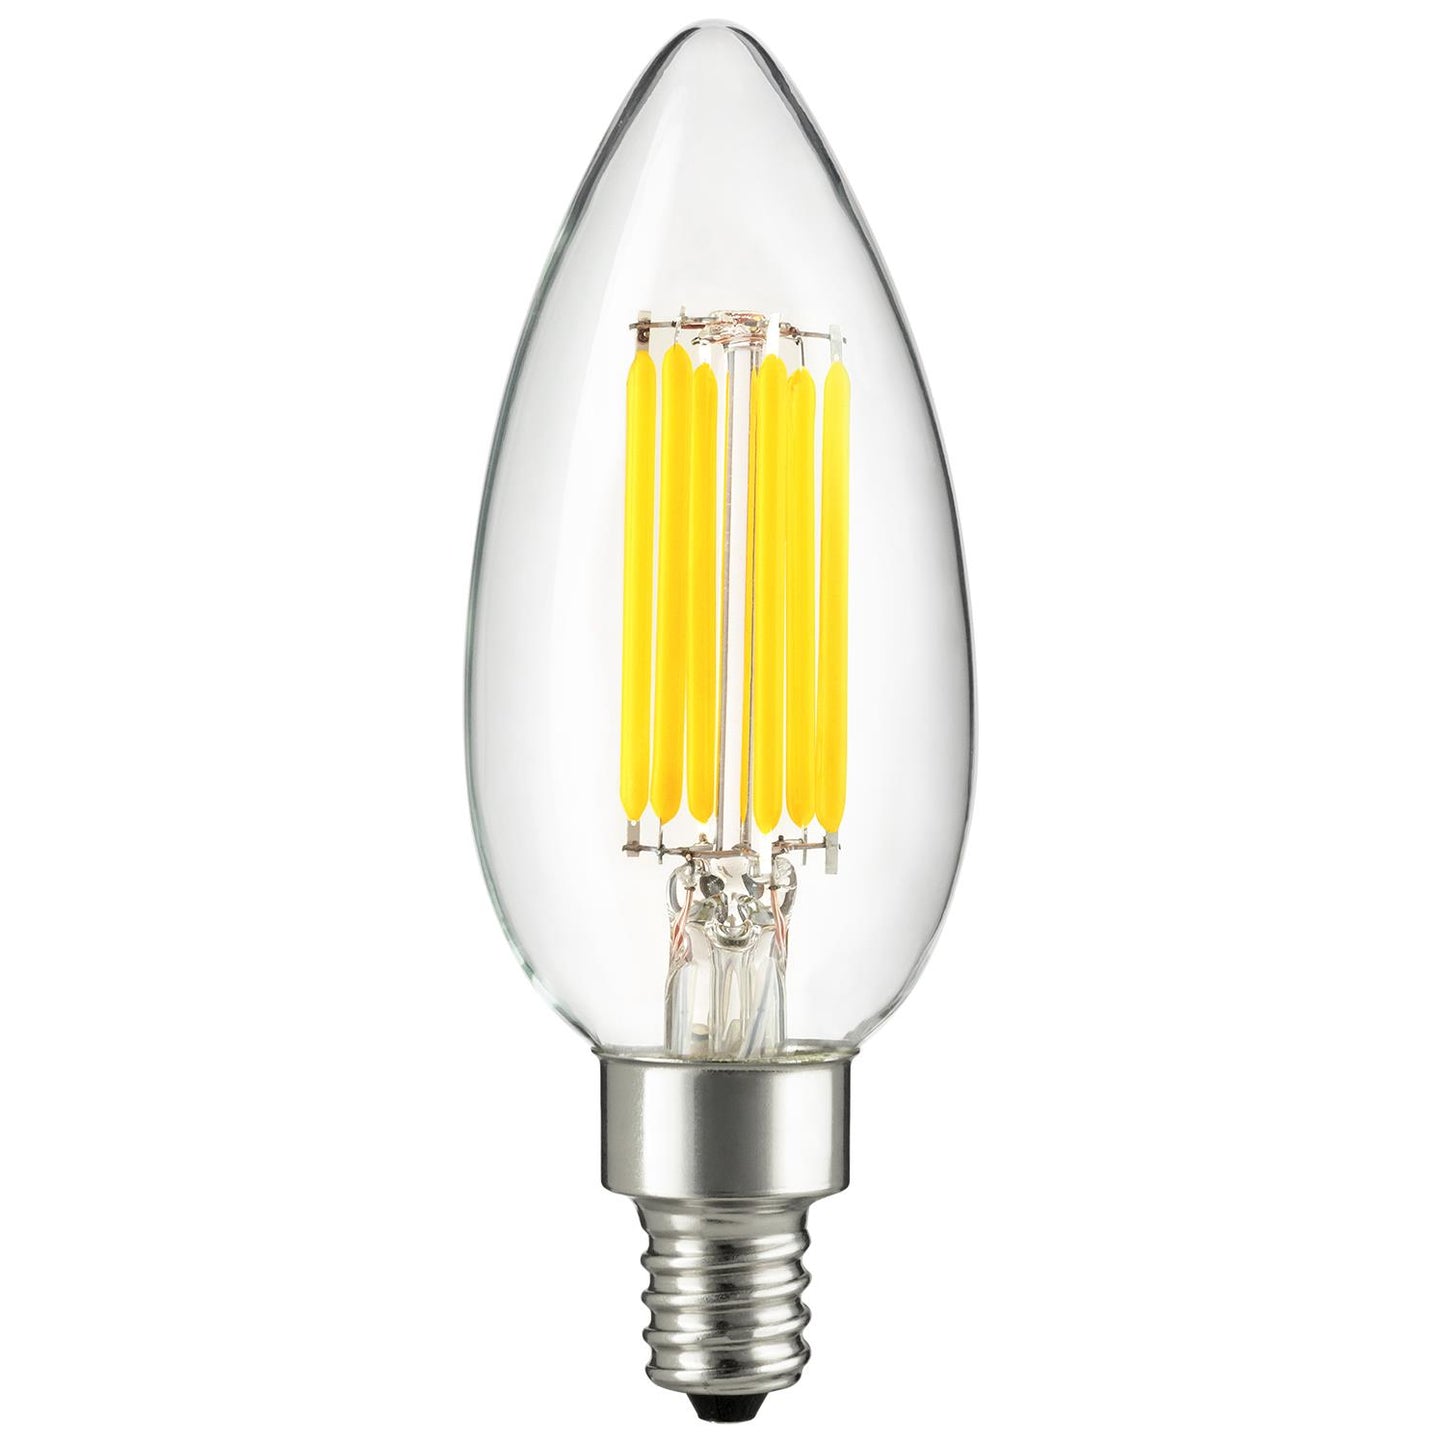 Sunlite 81103-SU LED Filament Chandelier Bulb with Torpedo Tip, 5 Watts (60W Equivalent), Candelabra Base (E12), Clear, Dimmable, 30K - Warm White 1 Pack